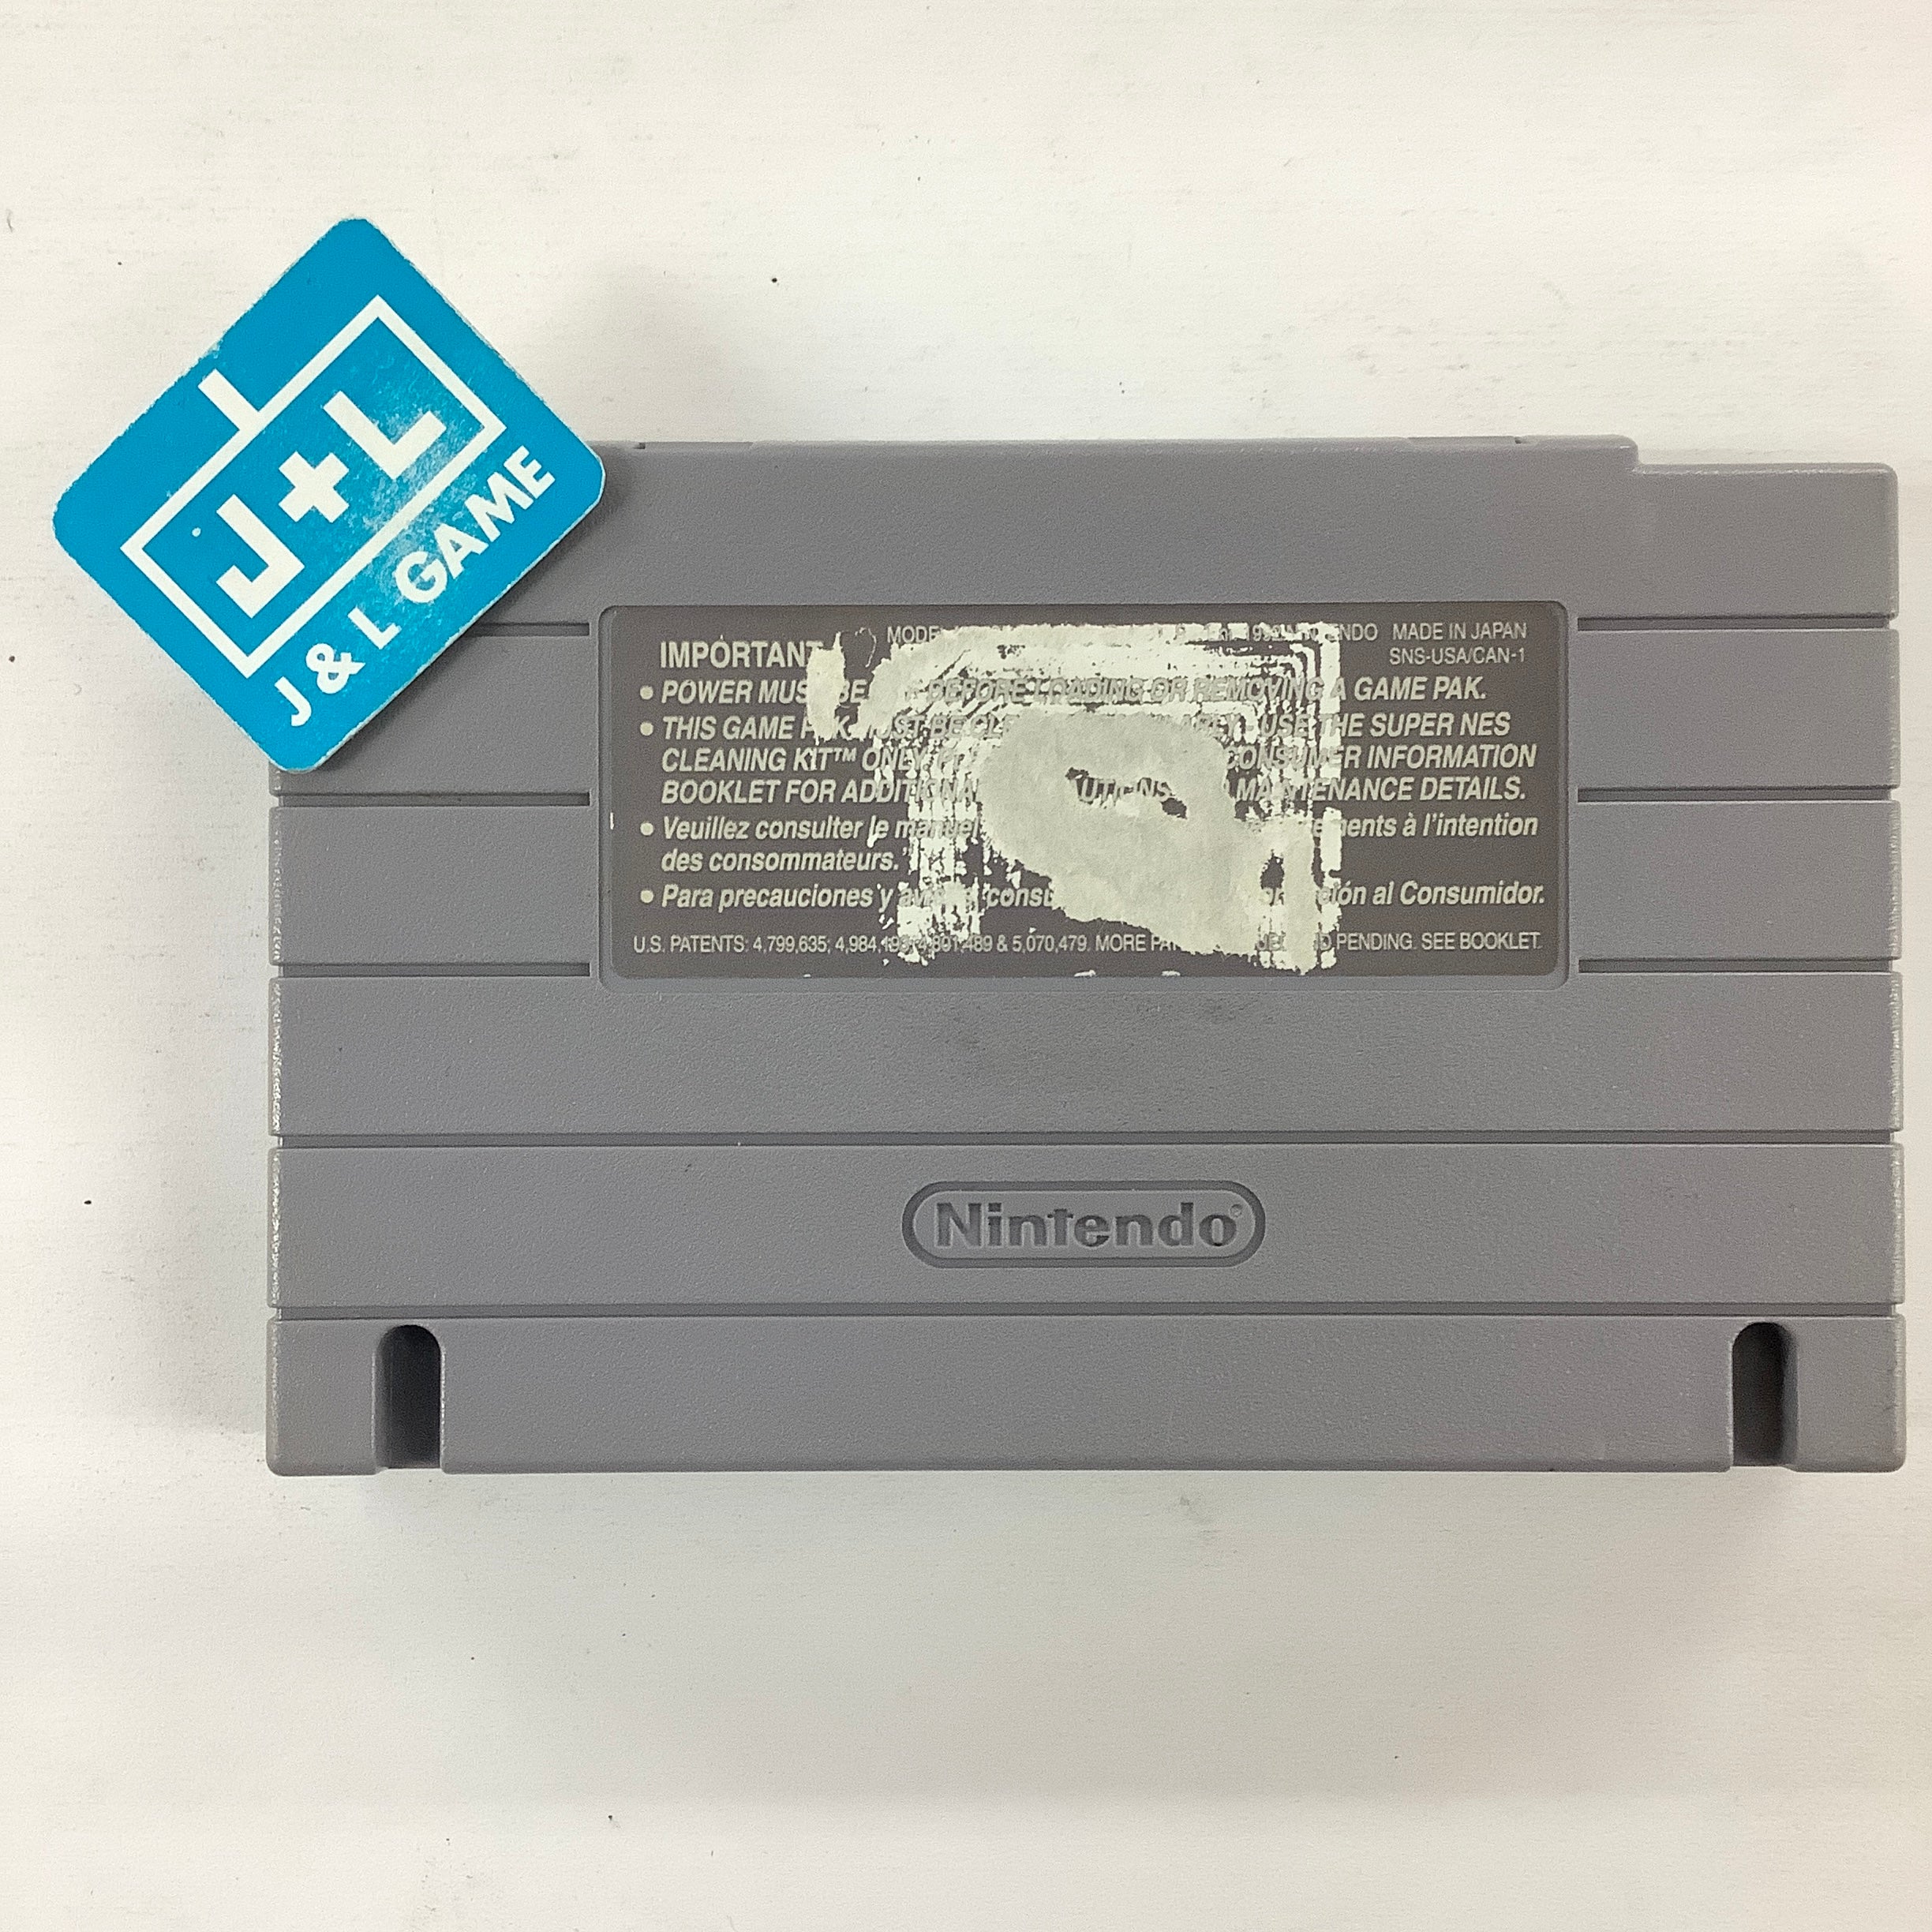 Jammit - (SNES) Super Nintendo [Pre-Owned] Video Games GTE Entertainment   